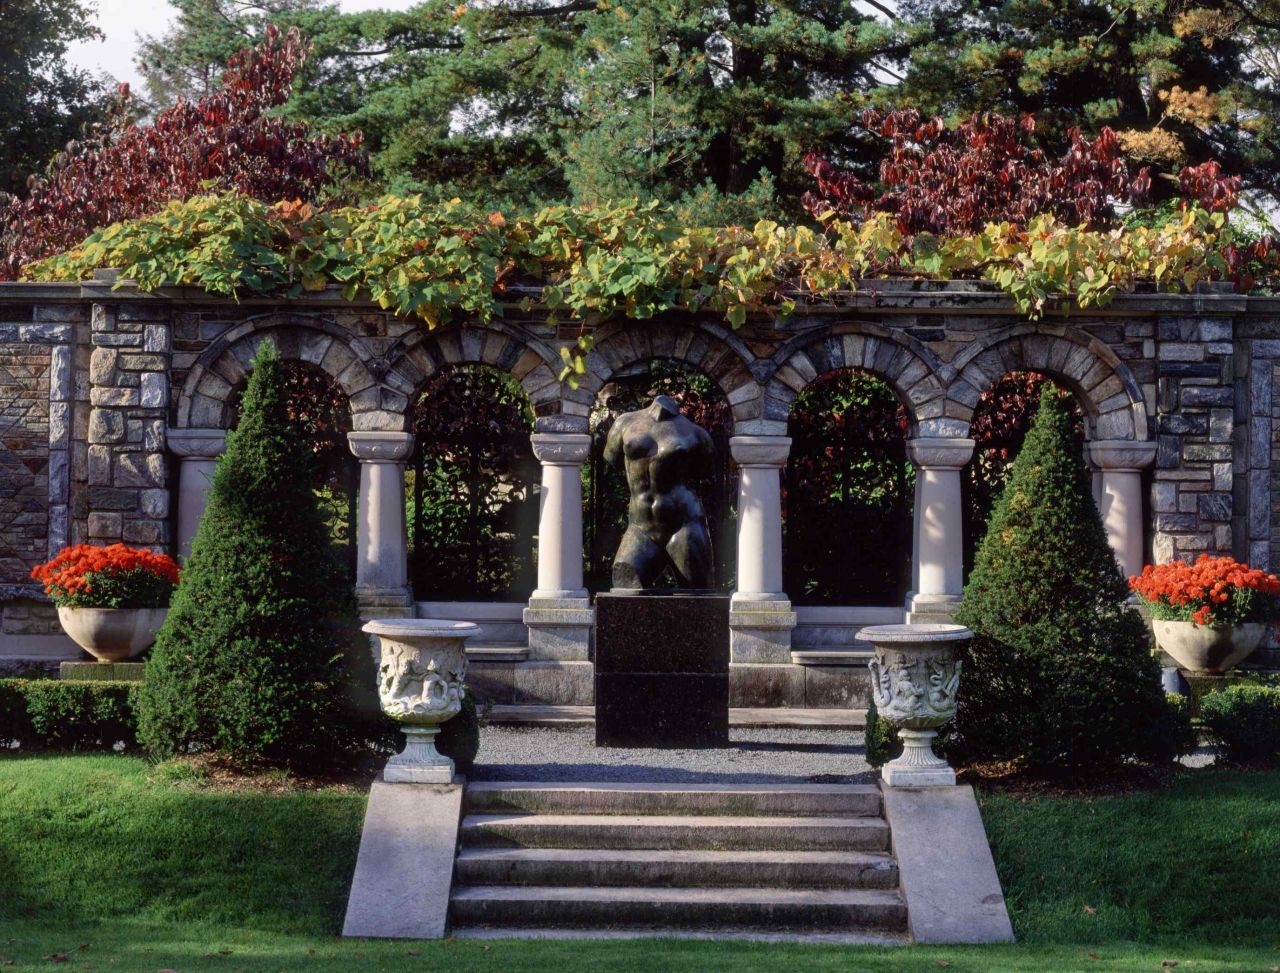 Maillol's "The Torso" from 1906 is among the sculptures positioned across the lawns at Kykuit.